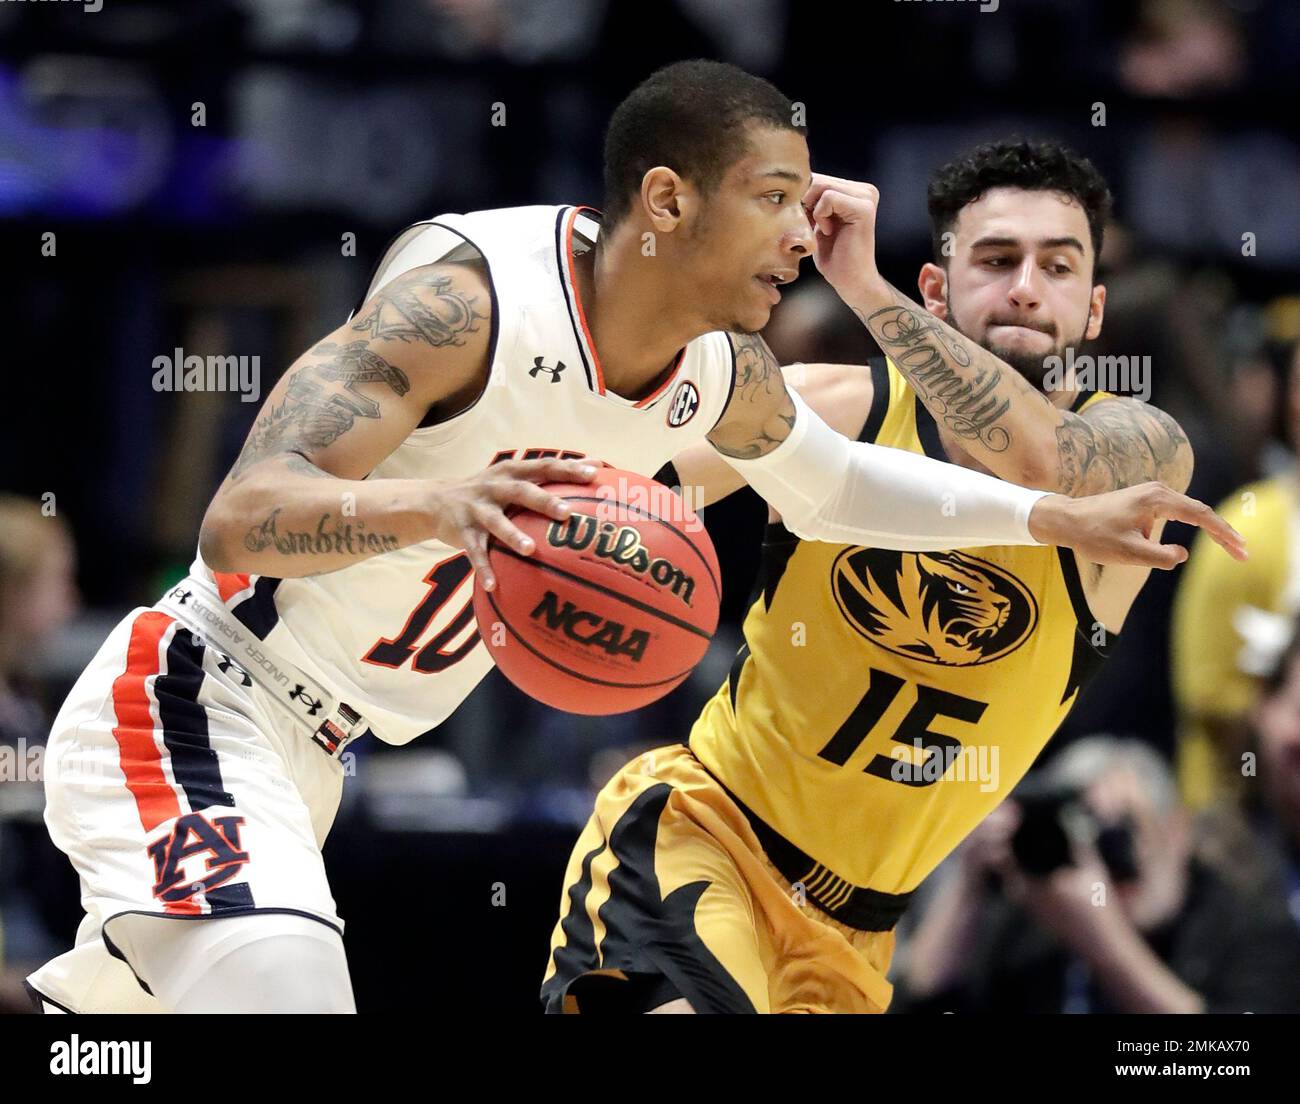 Auburn guard Samir Doughty (10) drives against Missouri guard Jordan Geist  (15) in the first half of an NCAA college basketball game at the  Southeastern Conference tournament Thursday, March 14, 2019, in